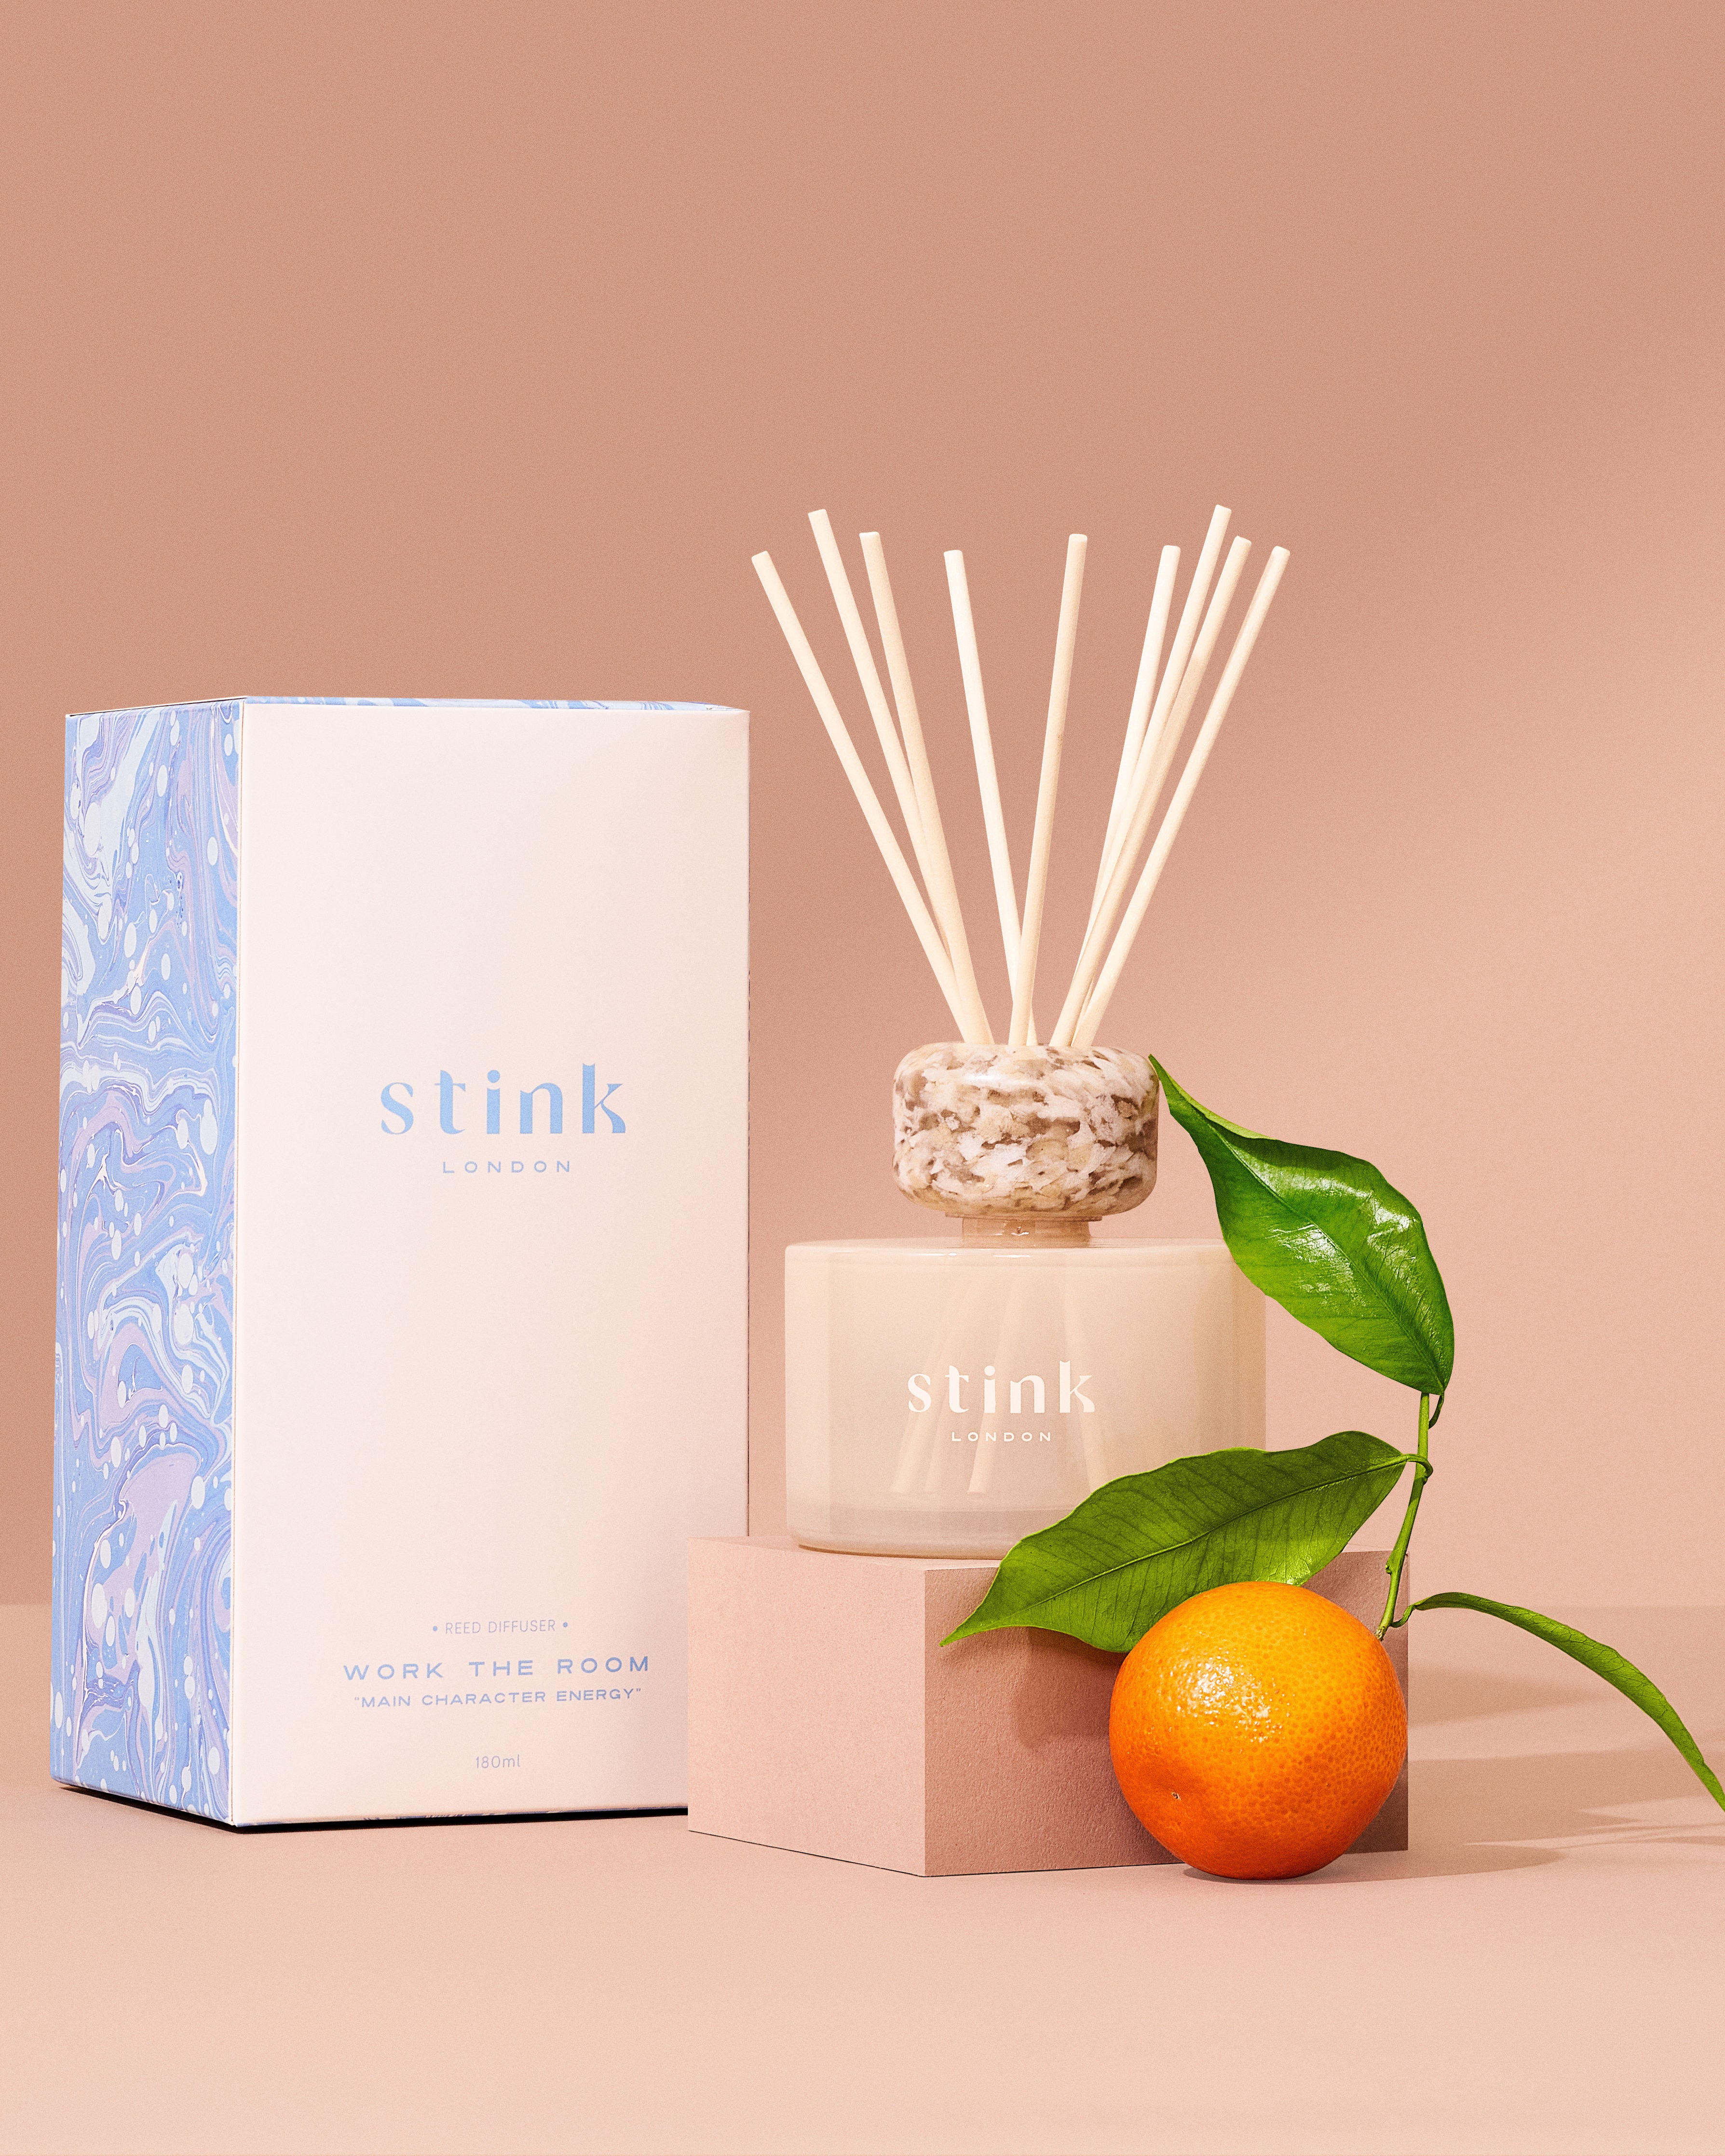 mothers day - stink london refillable subscription reed diffusers the perfect gift for home fragrance or interior design 